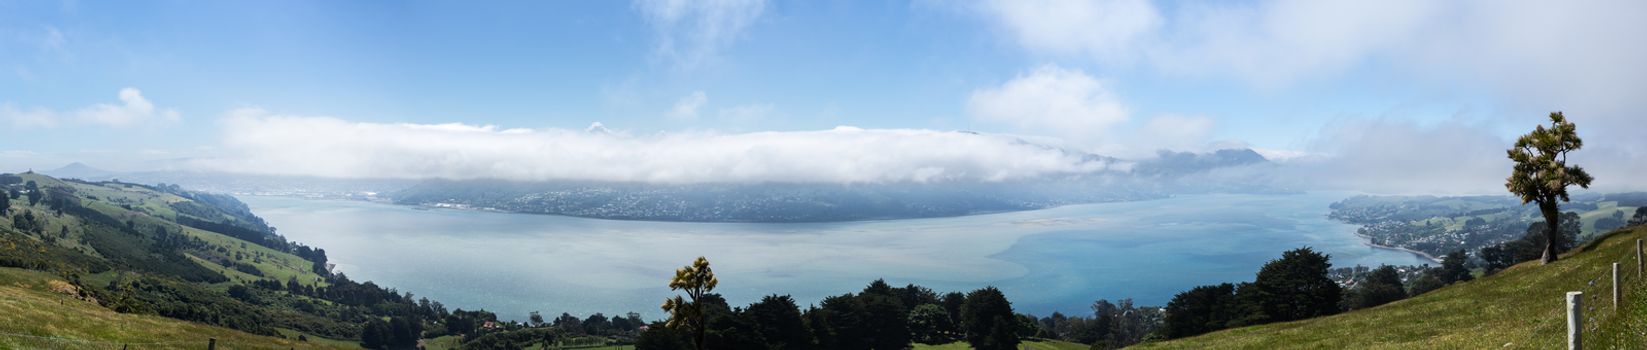 Broad panoramic landscape of the Otago Peninsula and Bay with the city of Dunedin in the distance and clouds hanging over the mountains